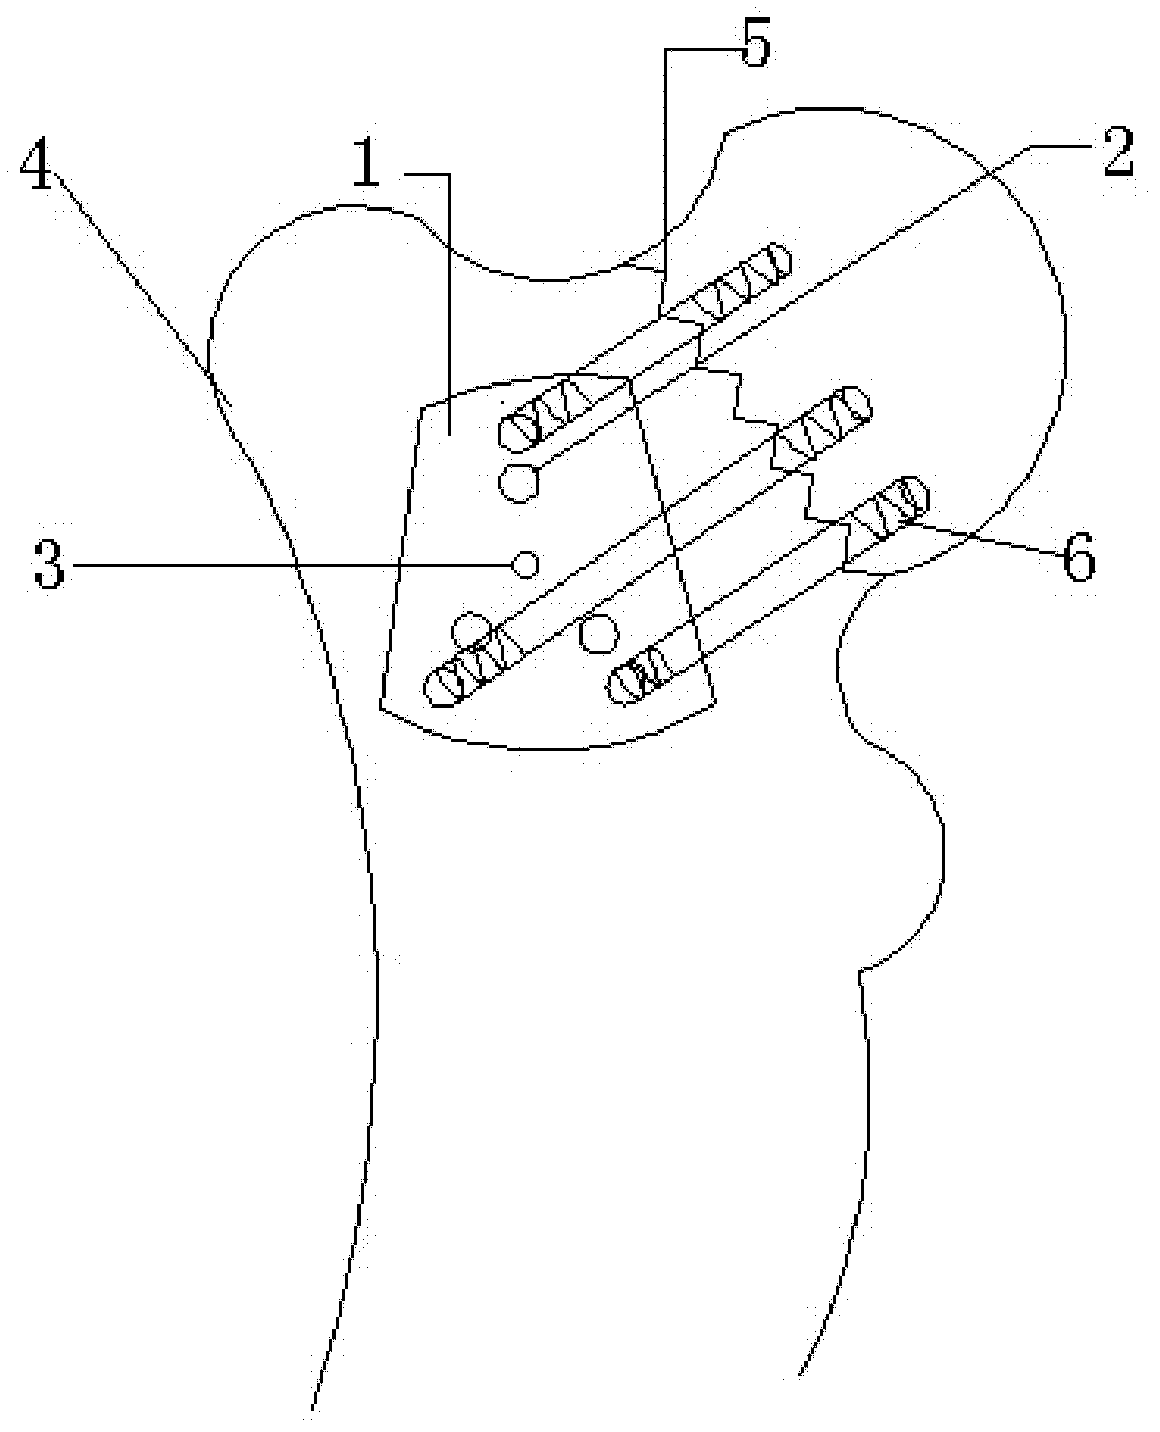 Trapezoid locking steel plate with radifor treating femoral neck fracture